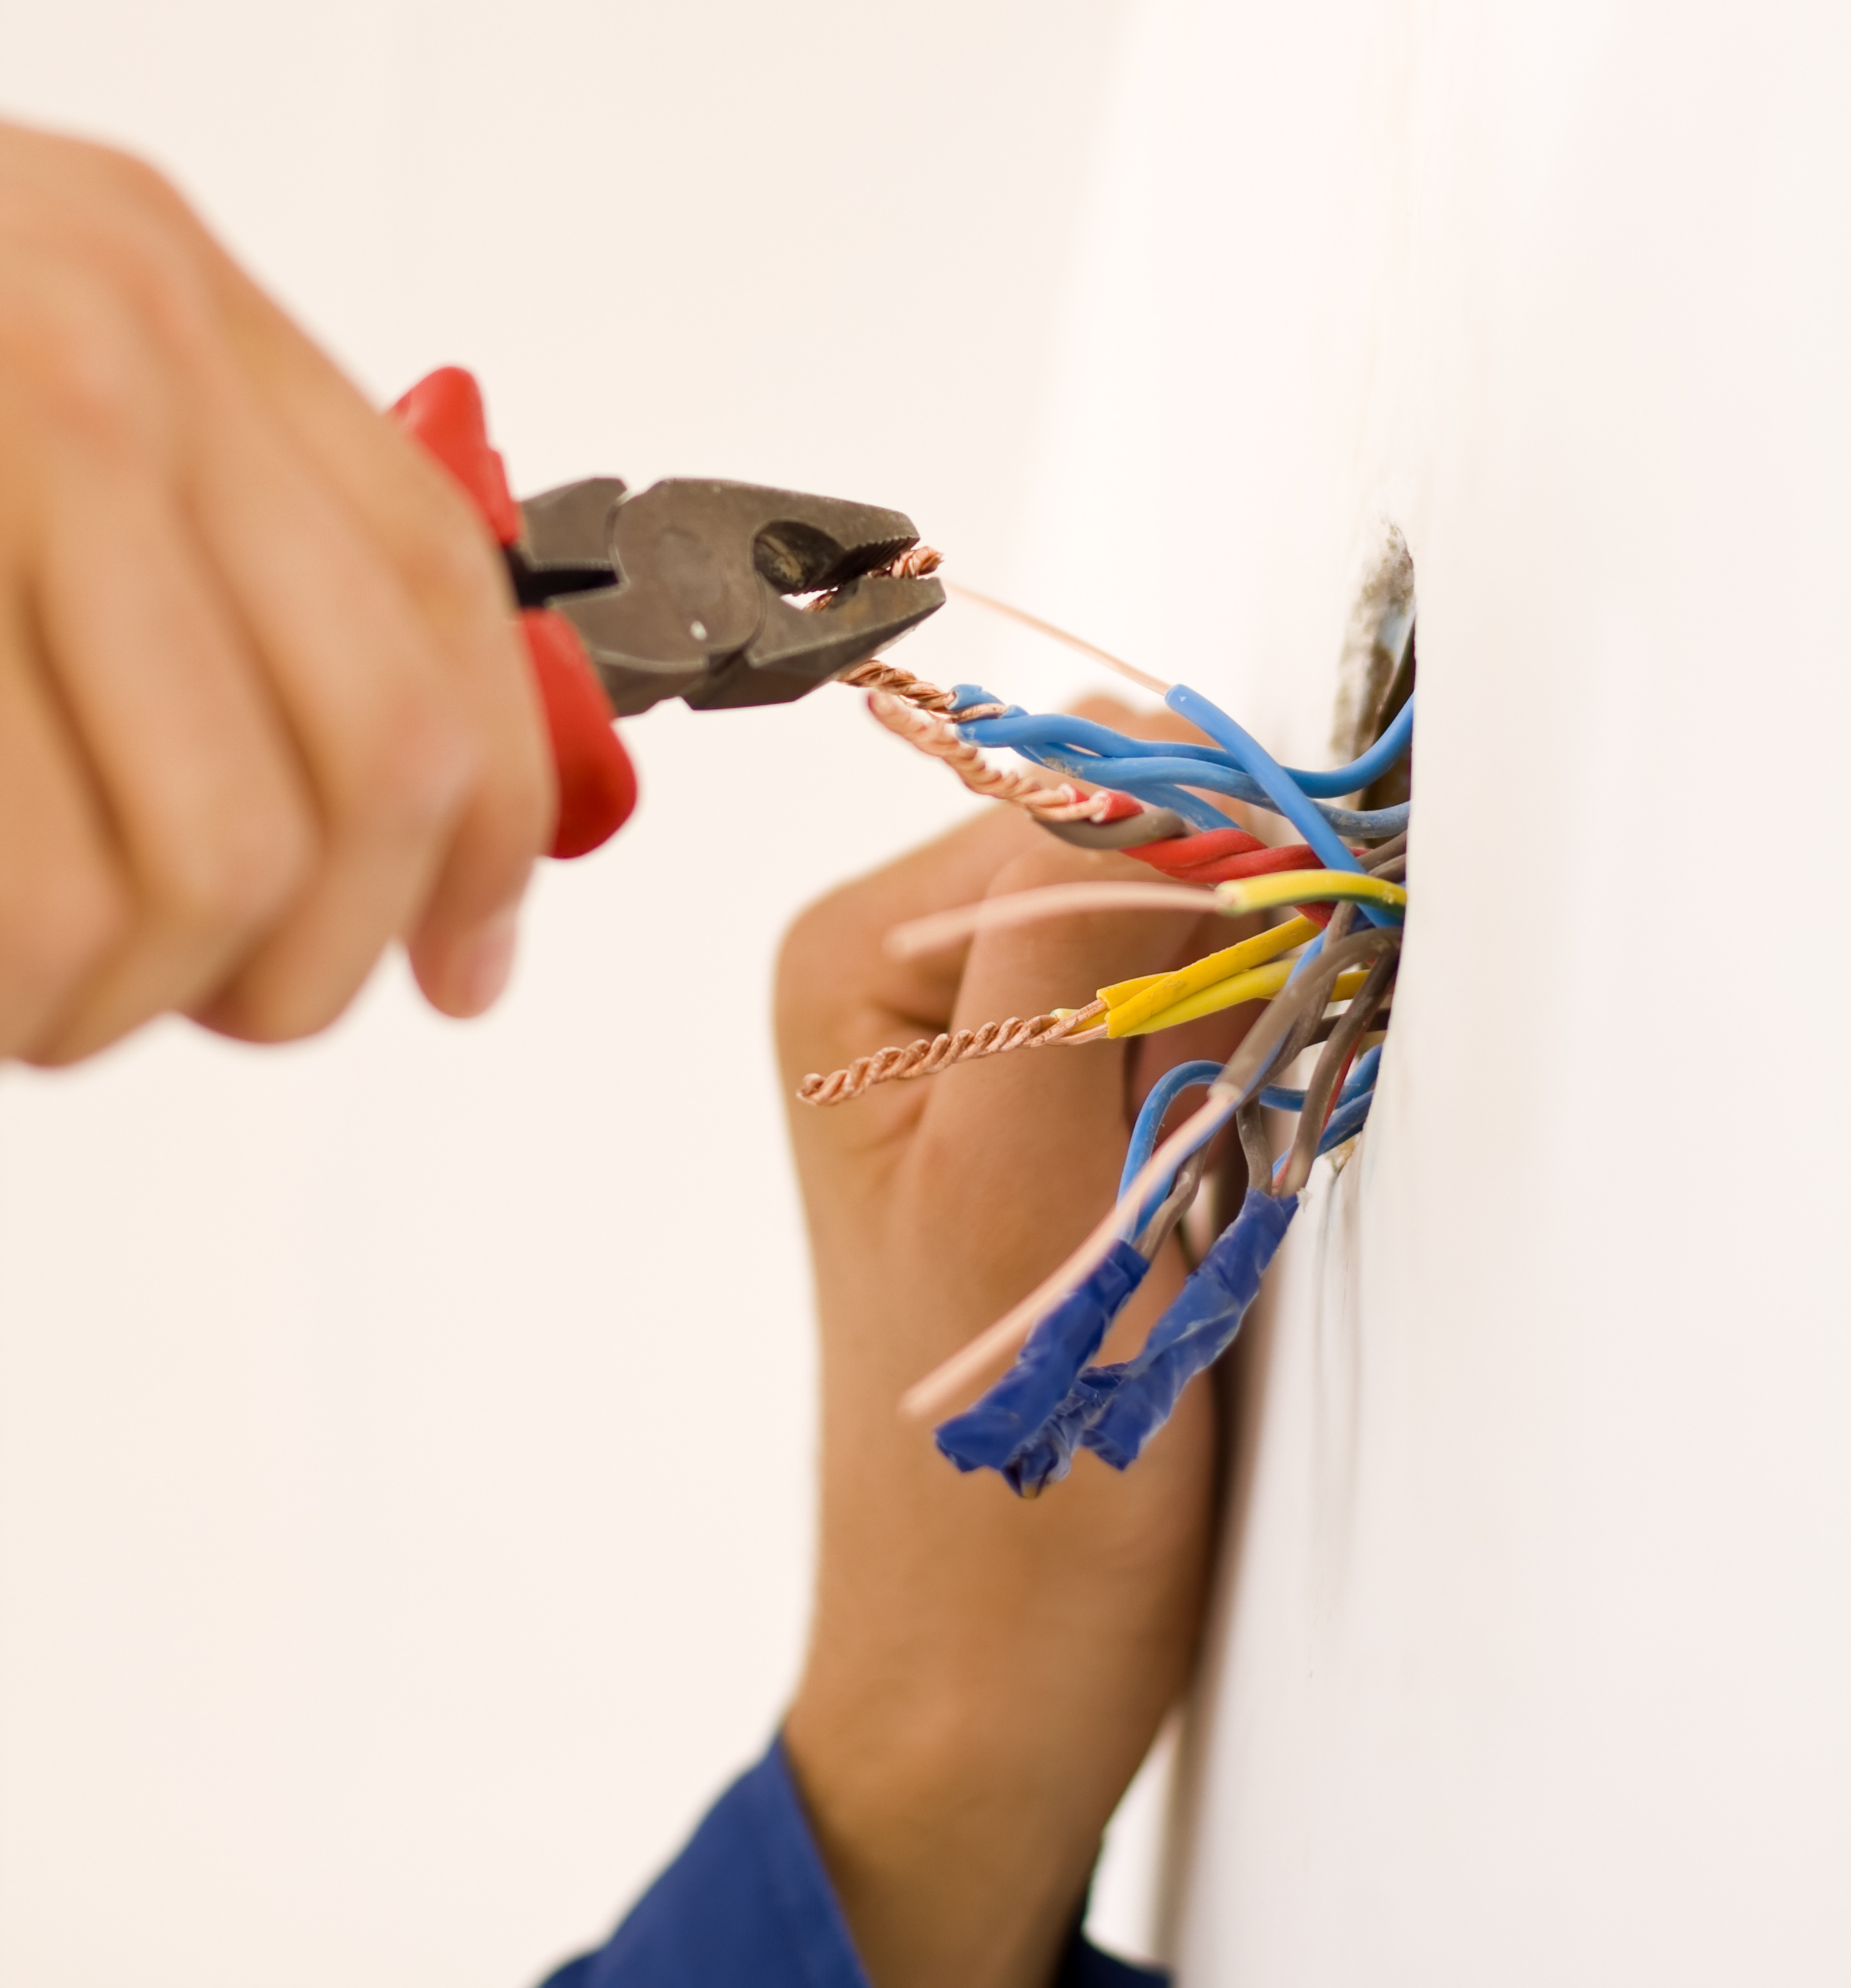 Contact Us - Trusted Electrical Contractor